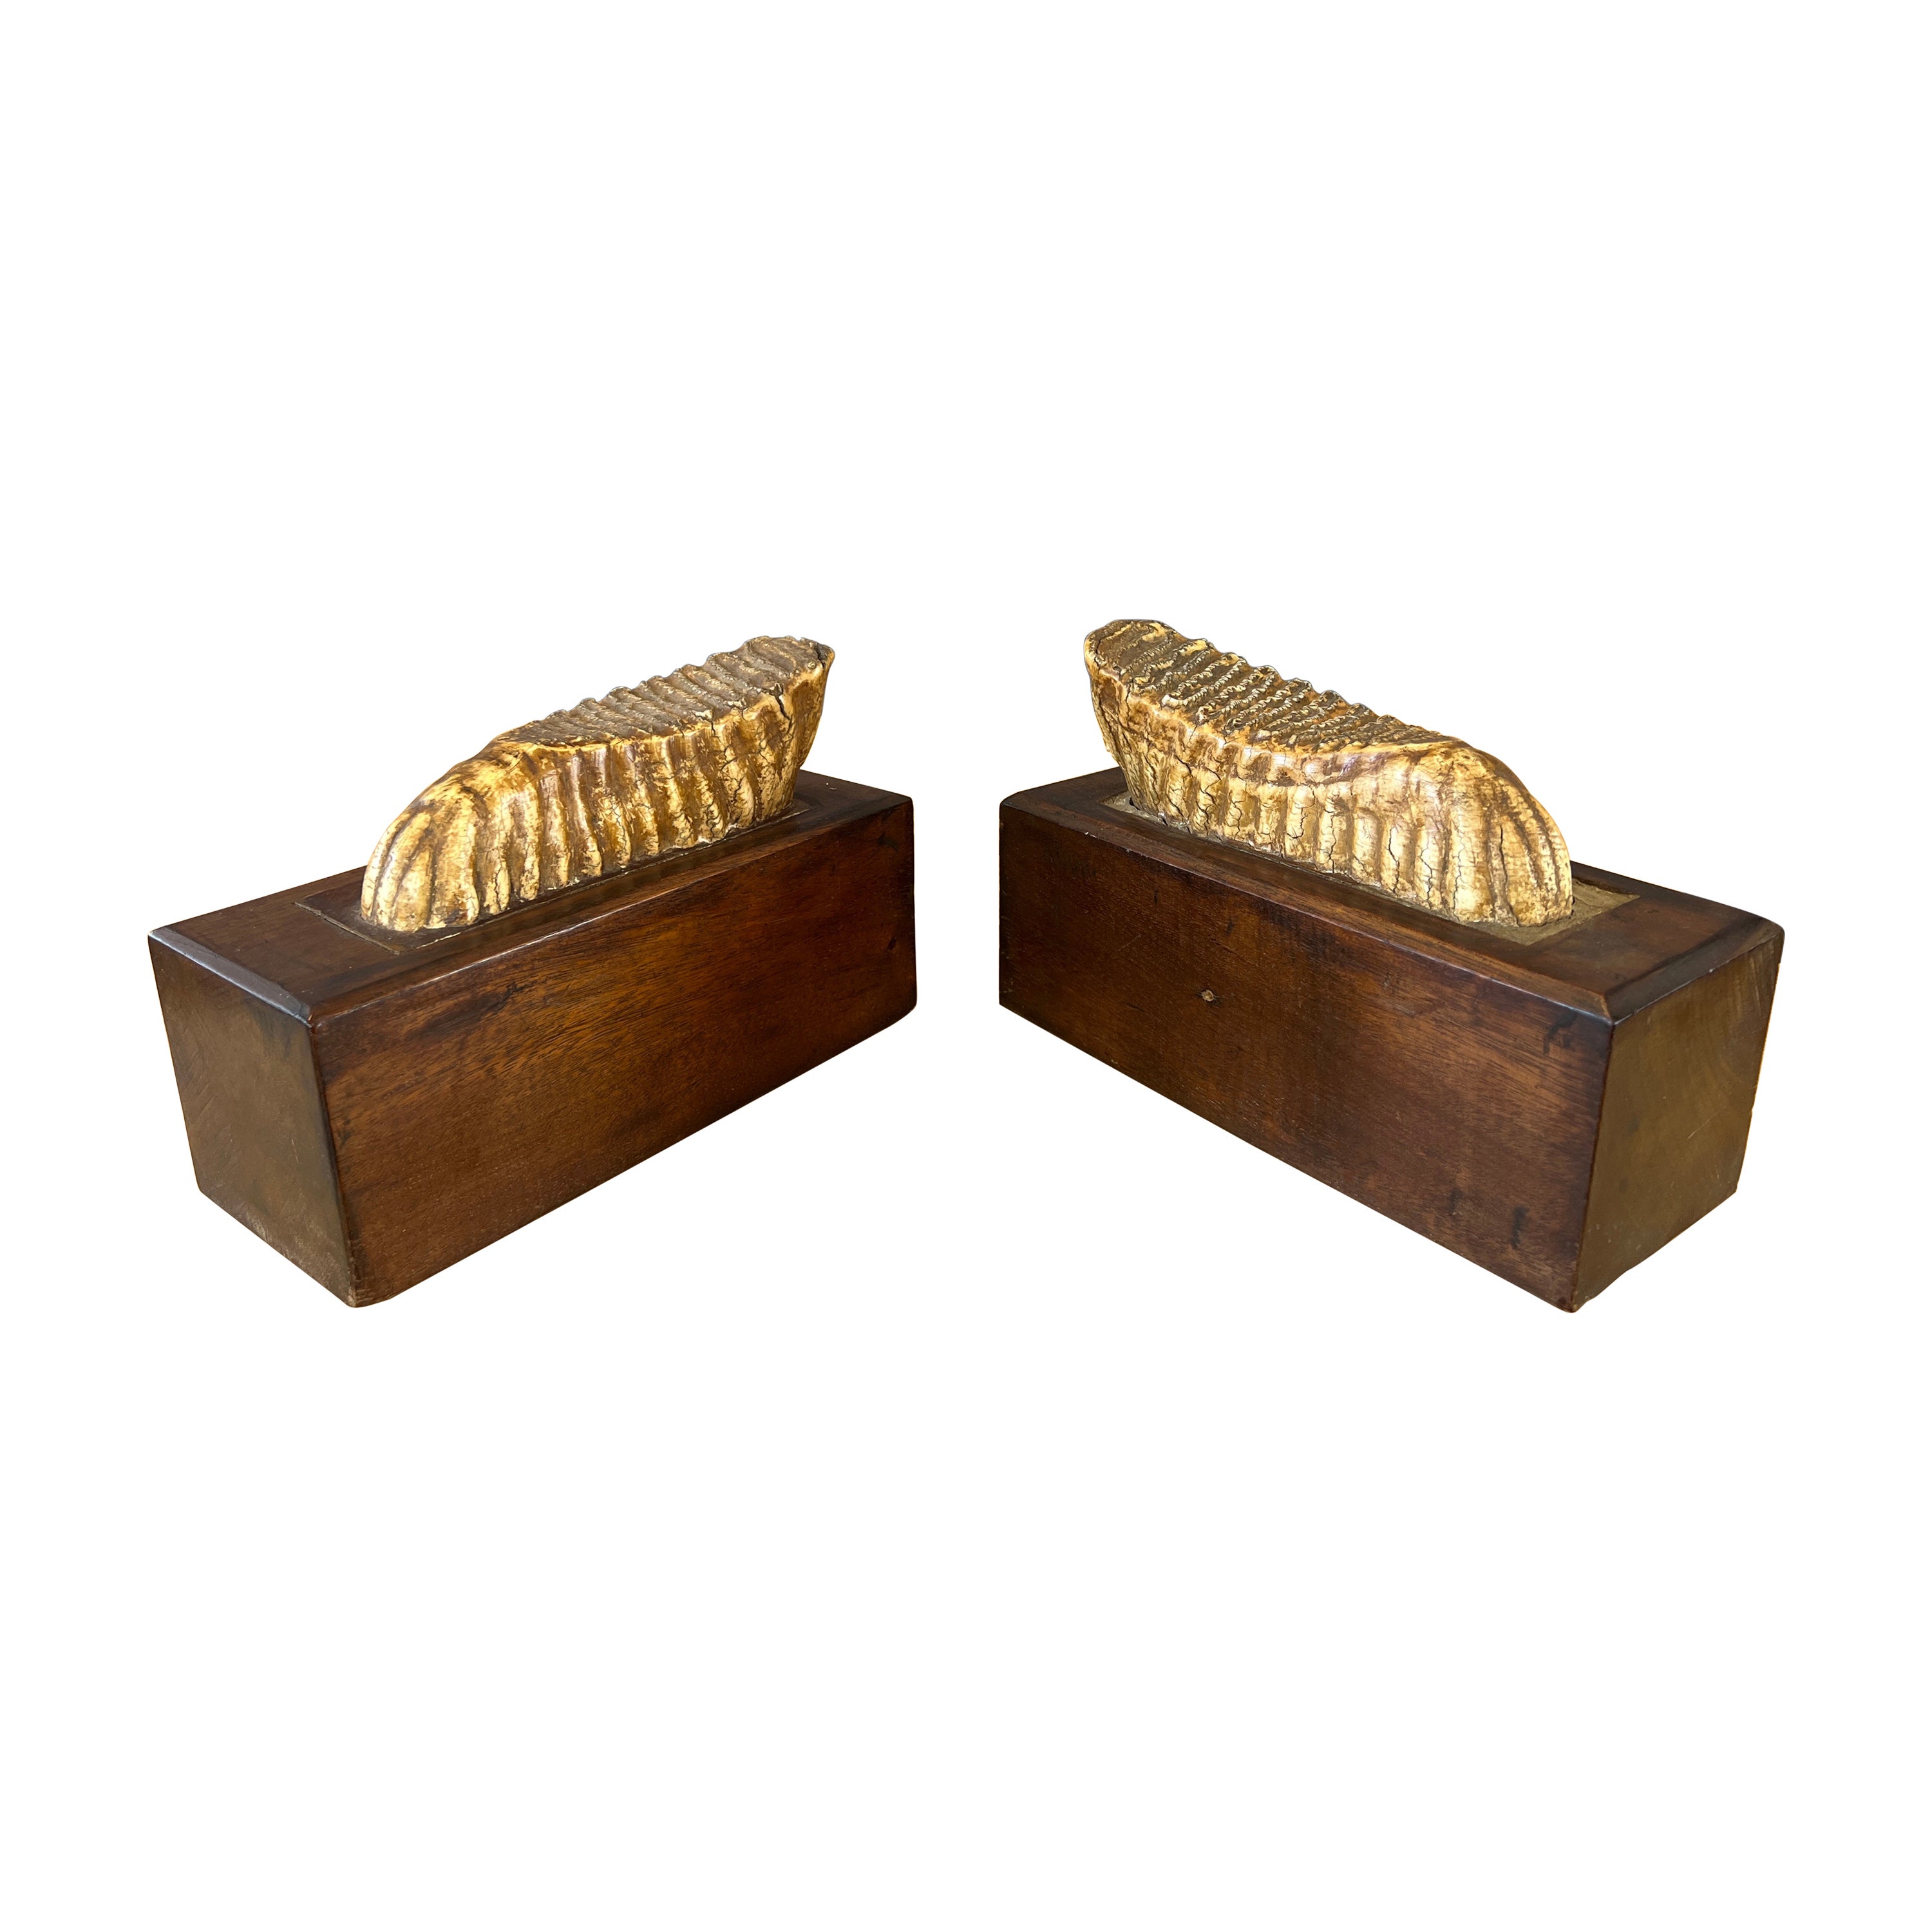 Pair of Impressive Mounted Woolly Mammoth Teeth Bookends For Sale